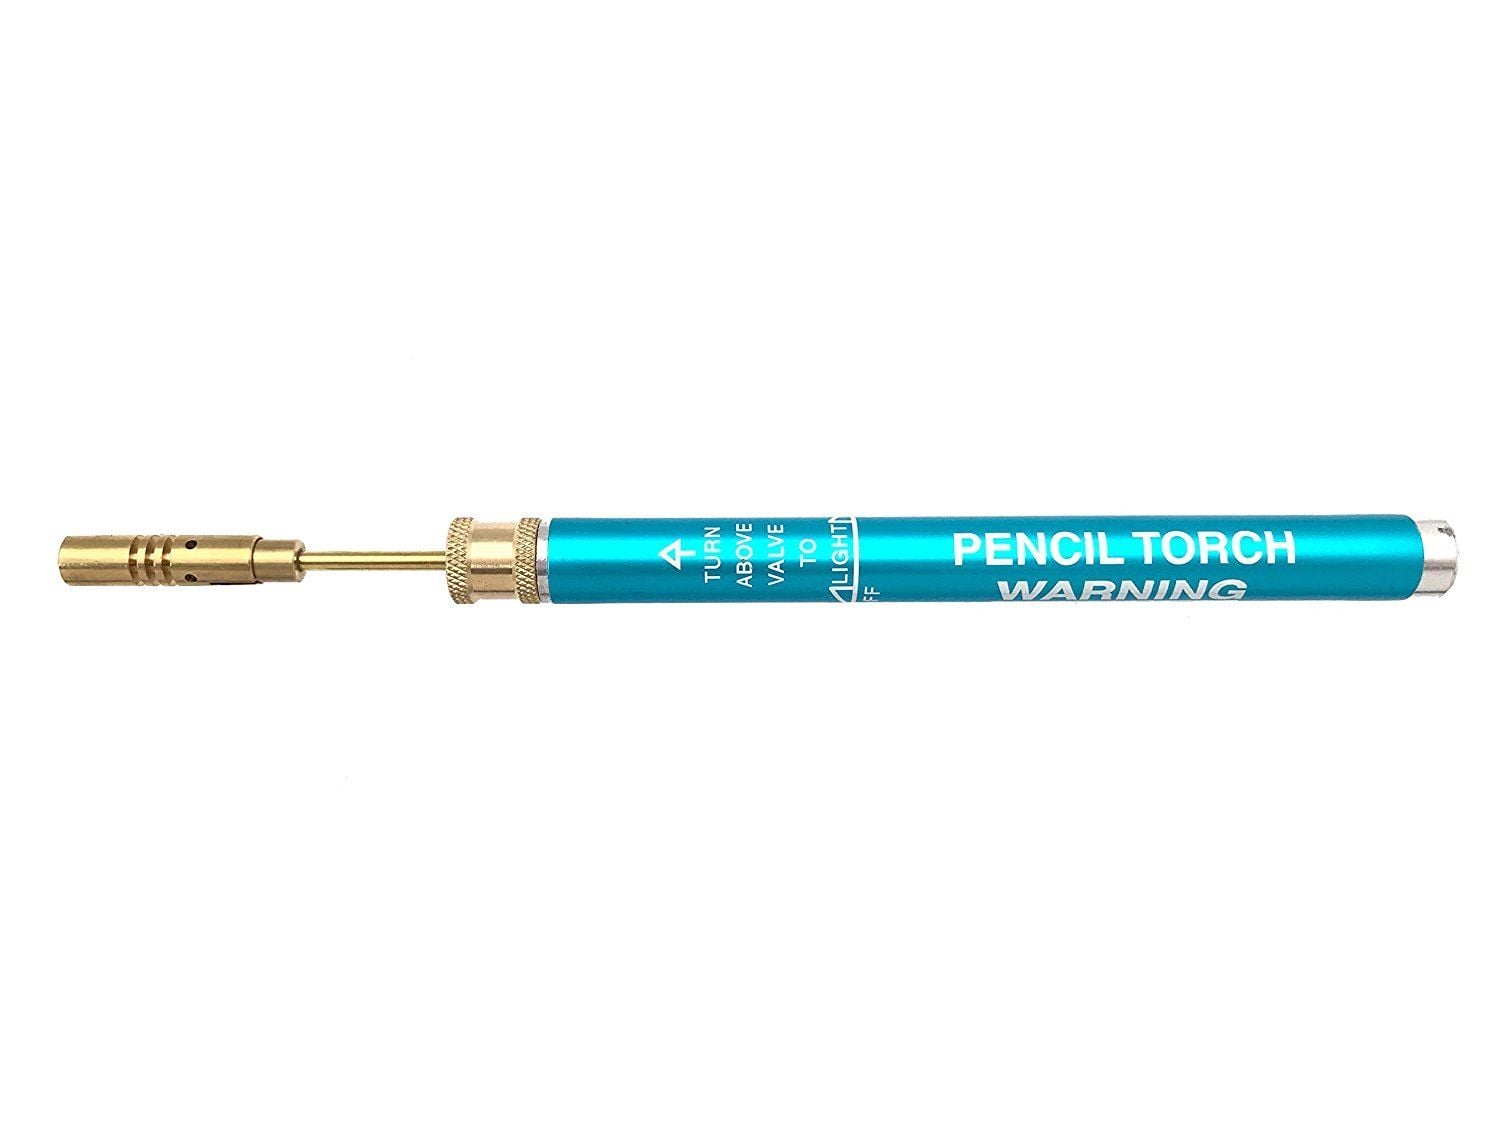 Why We Select The Soldering Pencil Torch?